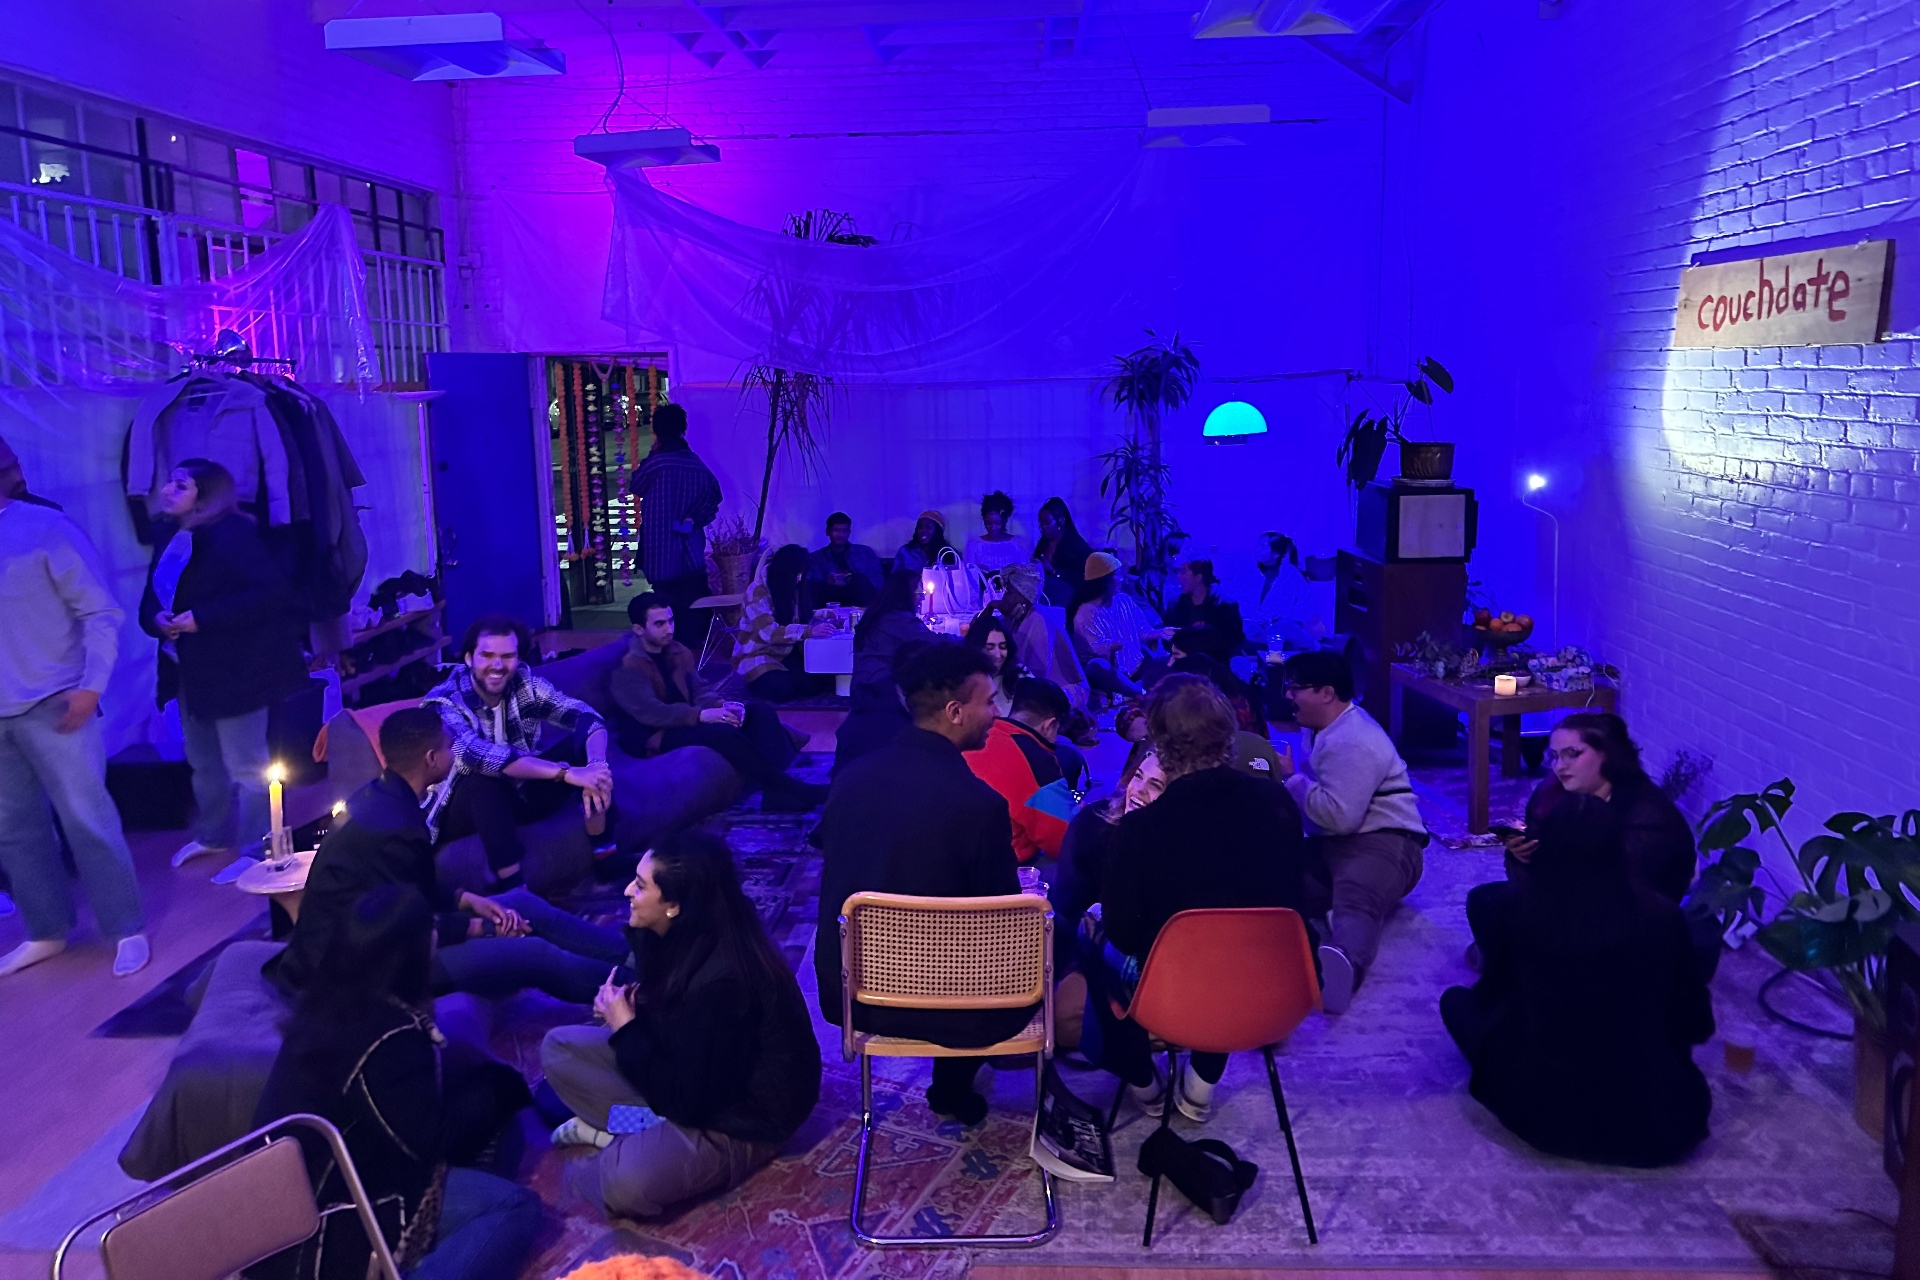 A blue-lit room filled with multiple people sitting and talking.